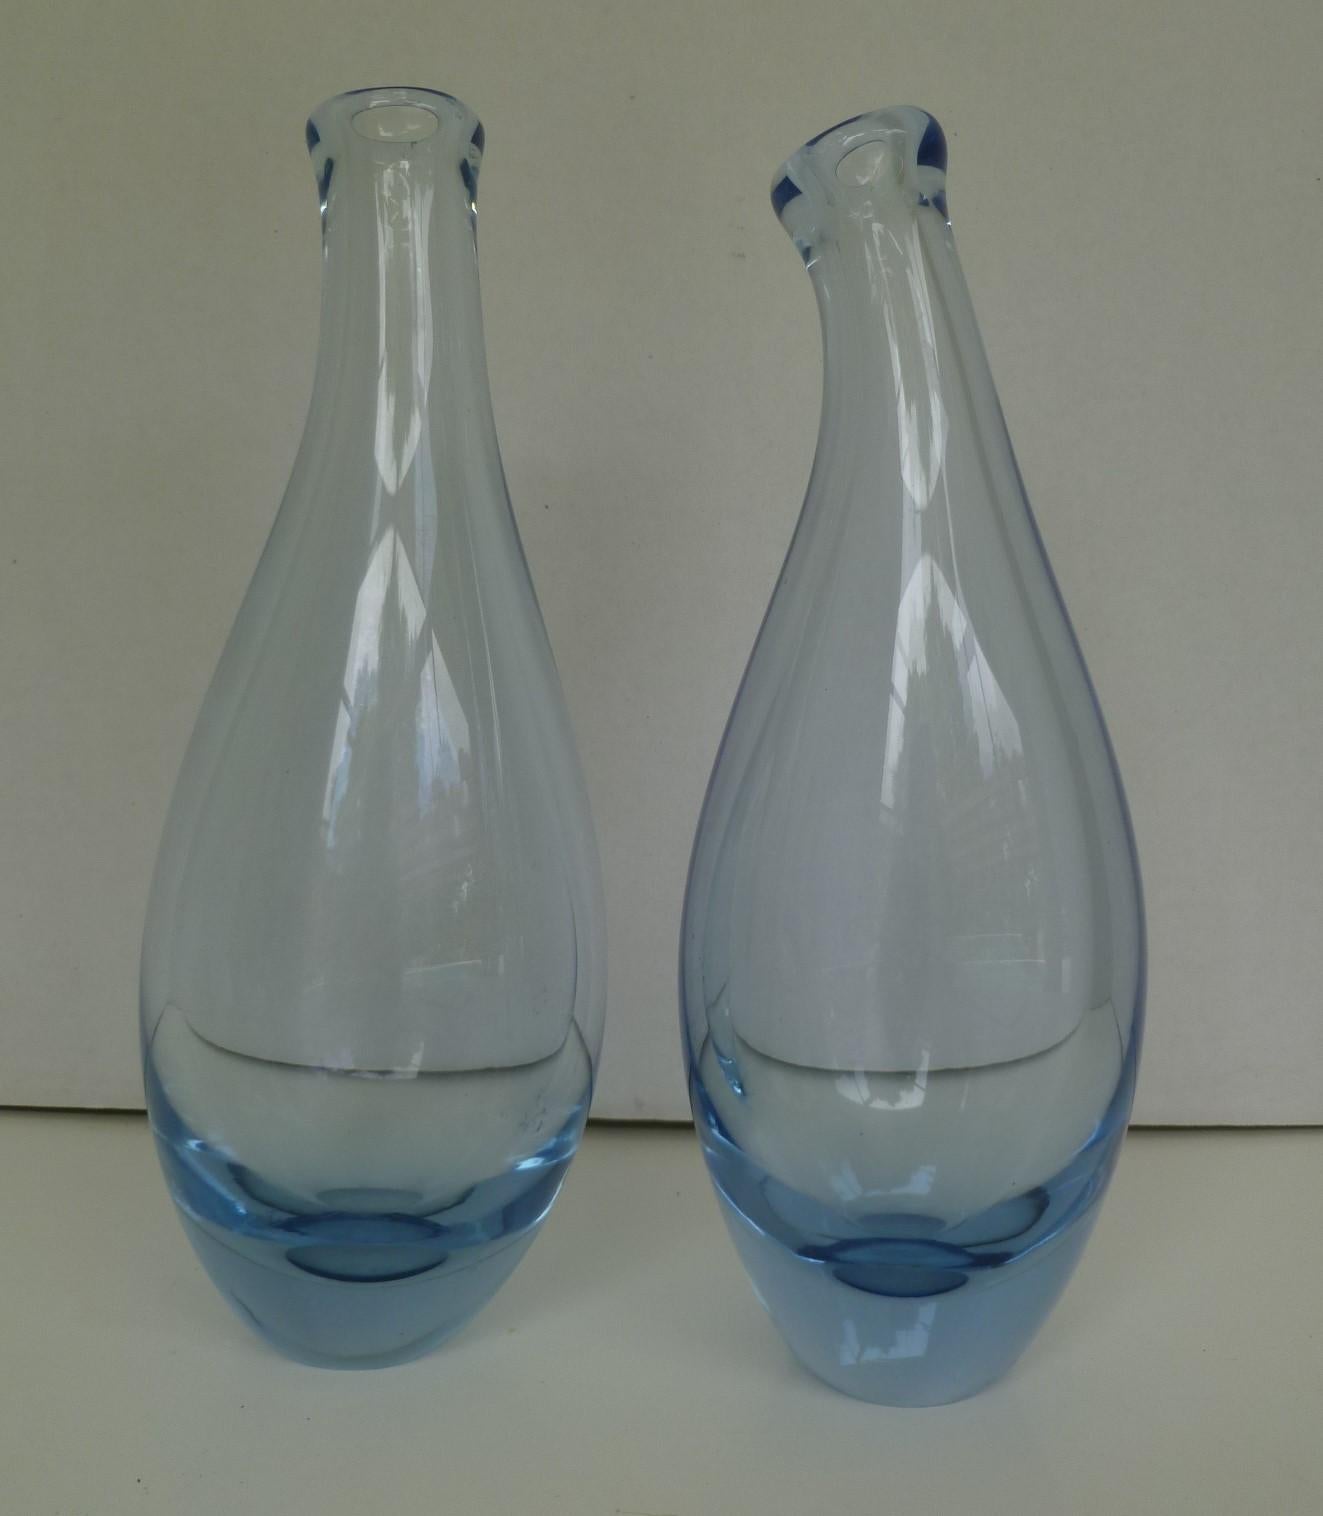 Per Lutken for Holmegaard, Denmark, two tall mouth blown blue glass vases both from 1960. The design of these vases with curved necks was an extension of Per Lutken's highly successful Beak vases of the 1950s. Holmegaard, established in 1823, is